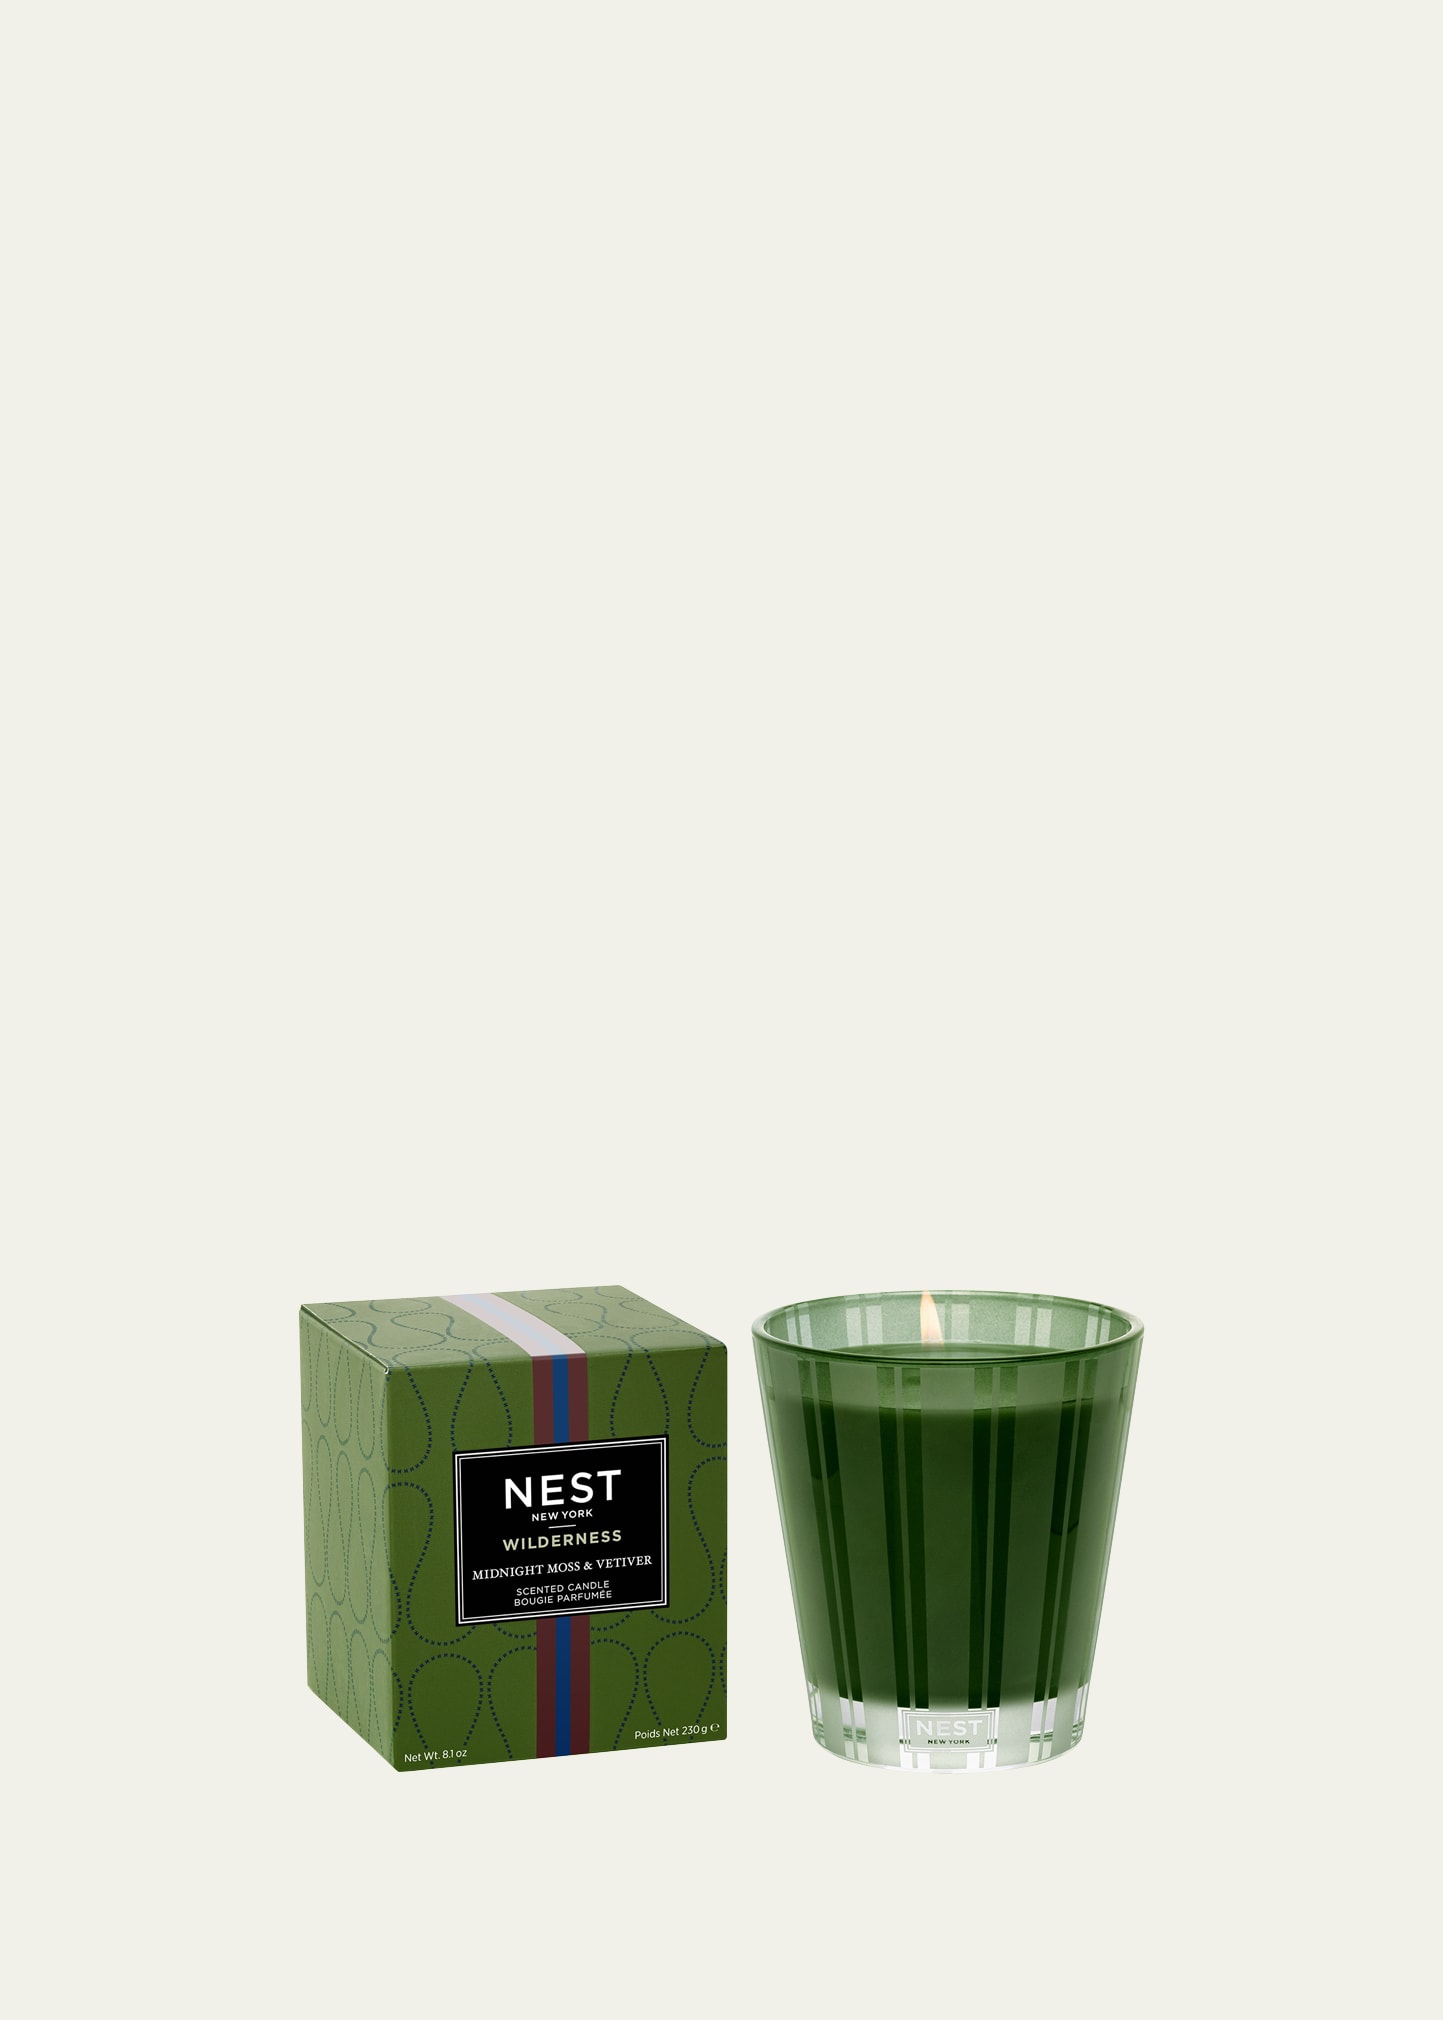 Wilderness Midnight Moss and Vetiver Classic Candle, 8.1 oz.